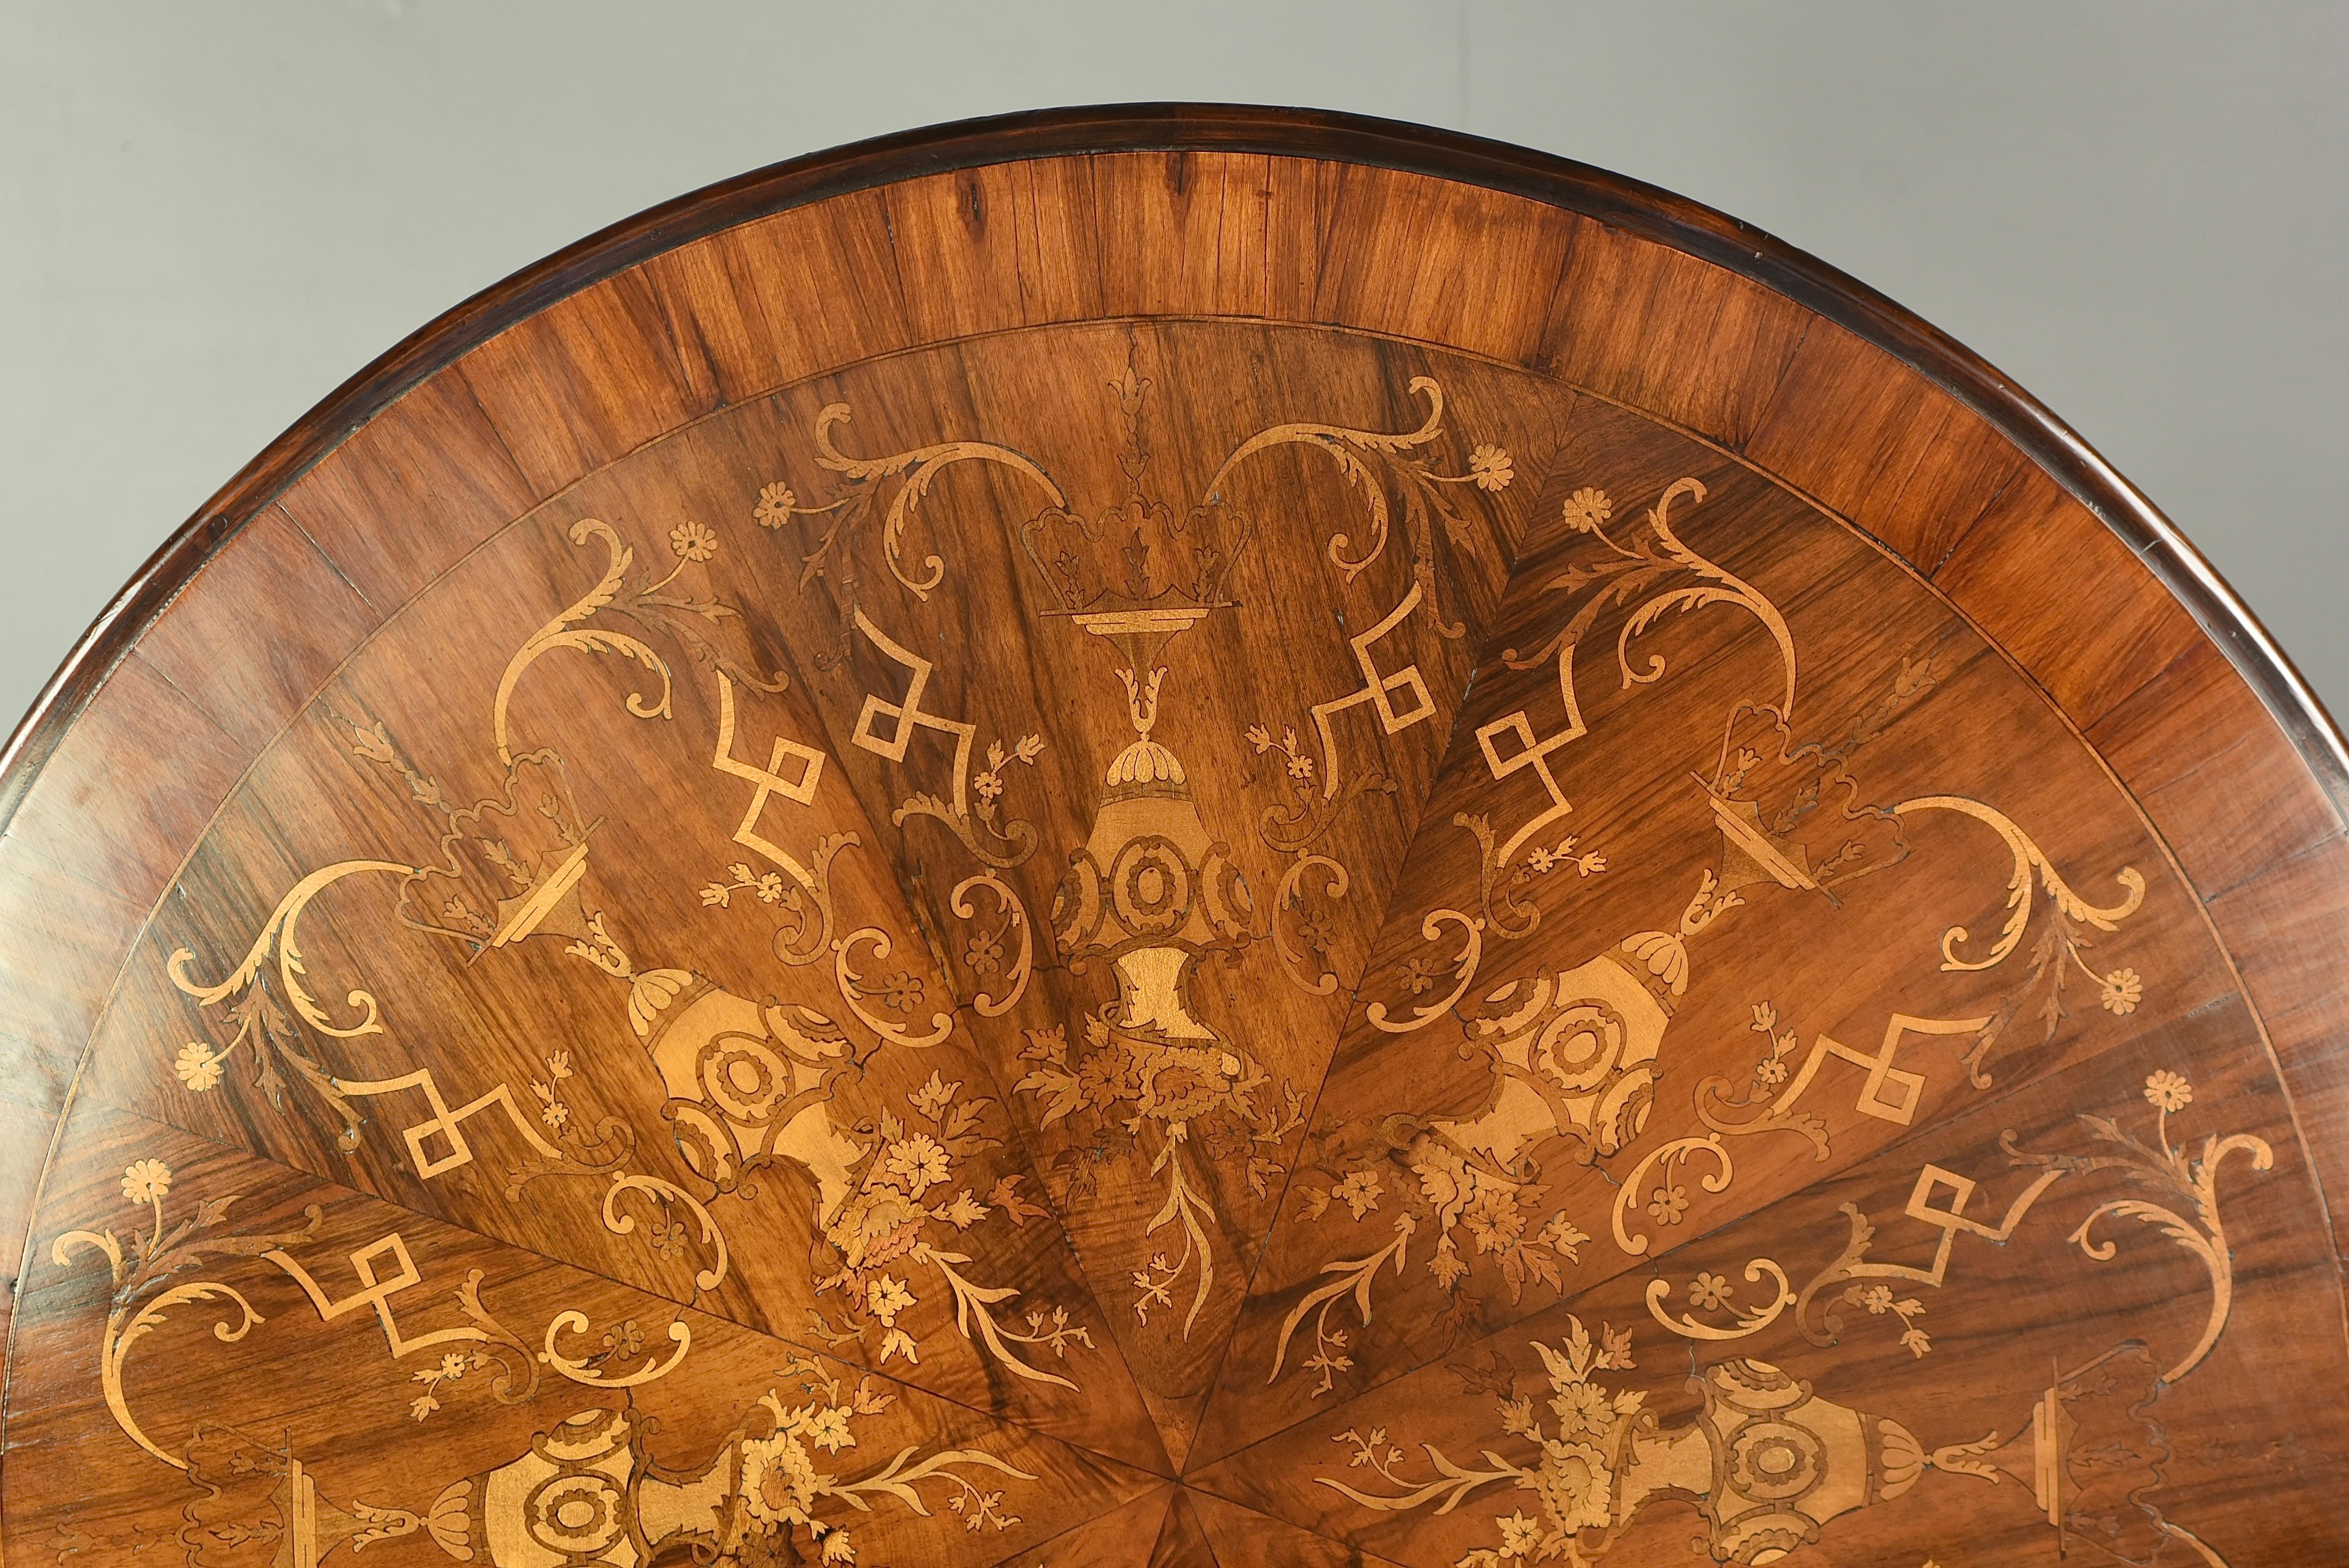 Fine quality inlaid walnut centre table circa 1900 .
The table is in very good condition with a great colour ,it has a diameter of 130 cm and will seat 6 as a dining table .
The top is profusely inlaid with exotic woods depicting vases and floral